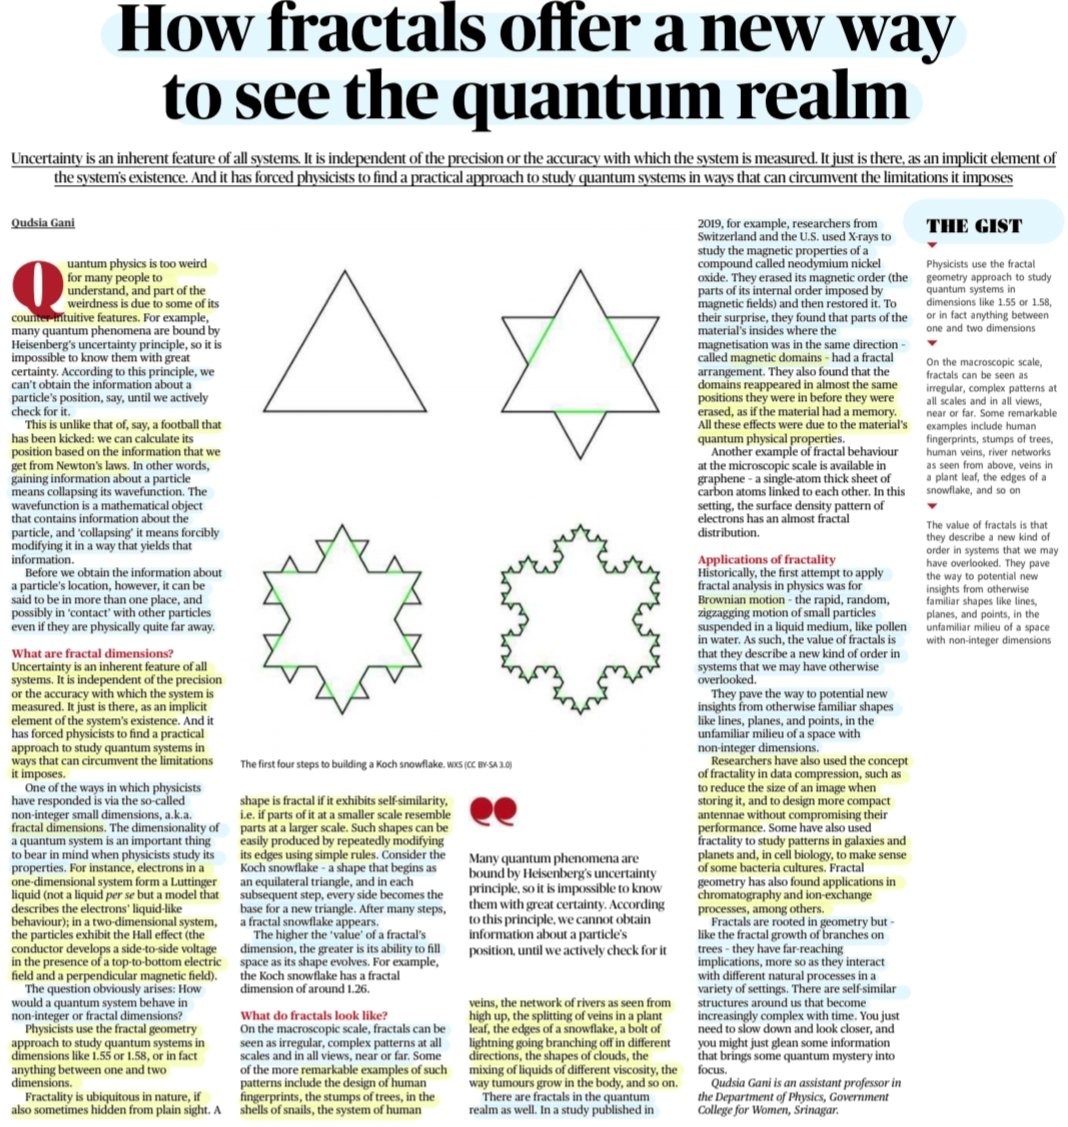 'How Fractals offer a new way to see the Quantum realm'

:Well explained by Ms Qudsia Gani

#QuantumRealm #Quantum #QuantumSystem #Fractal #Geometry 
#Uncertainty 
#FractalDimensions #MagneticDomains #BrownianMotion 
#Physics
#technology 

#UPSC 

Source: TH